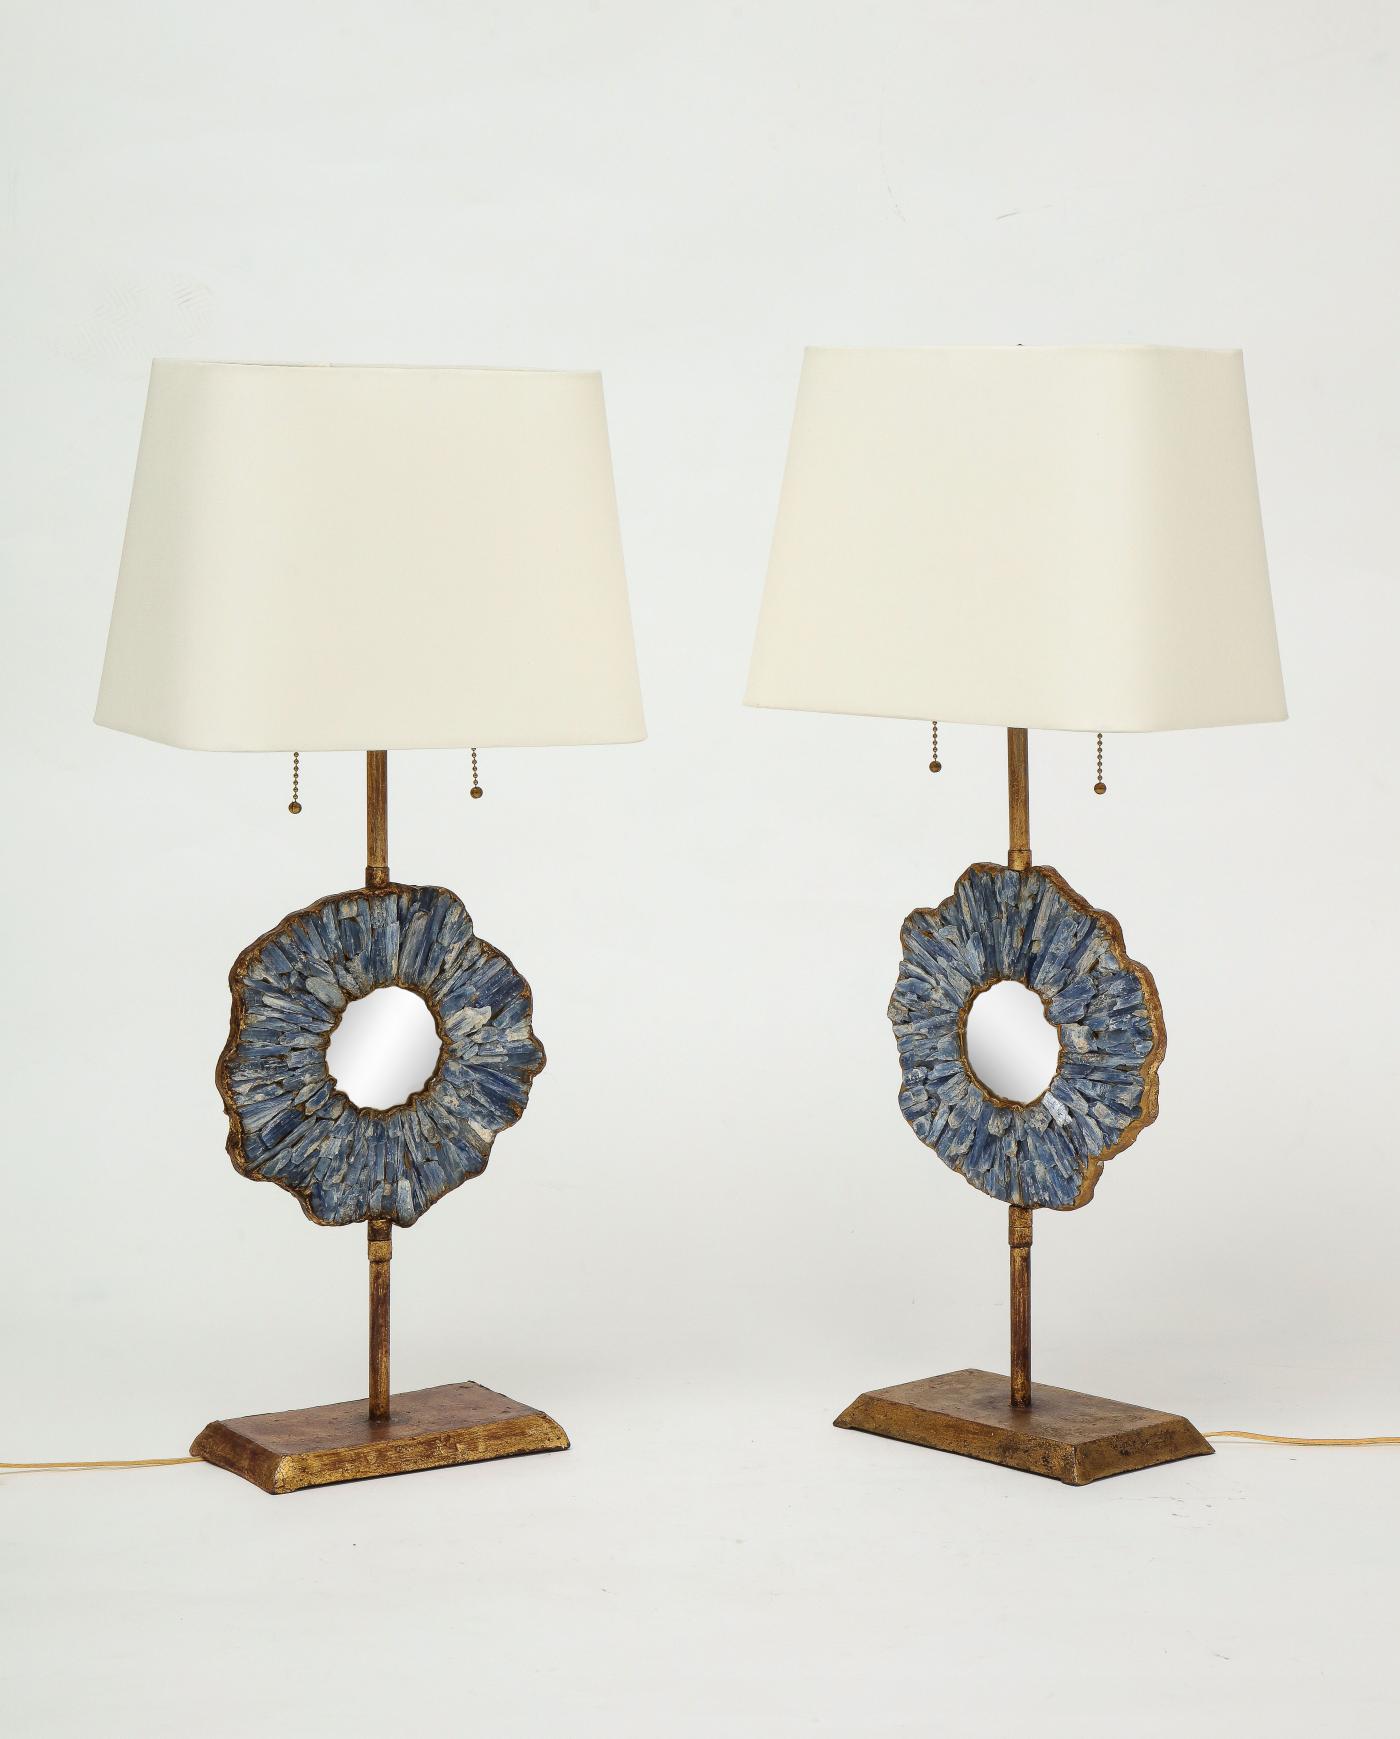 A Pair of Gilt Iron Table Lamps with Convex Mirrors